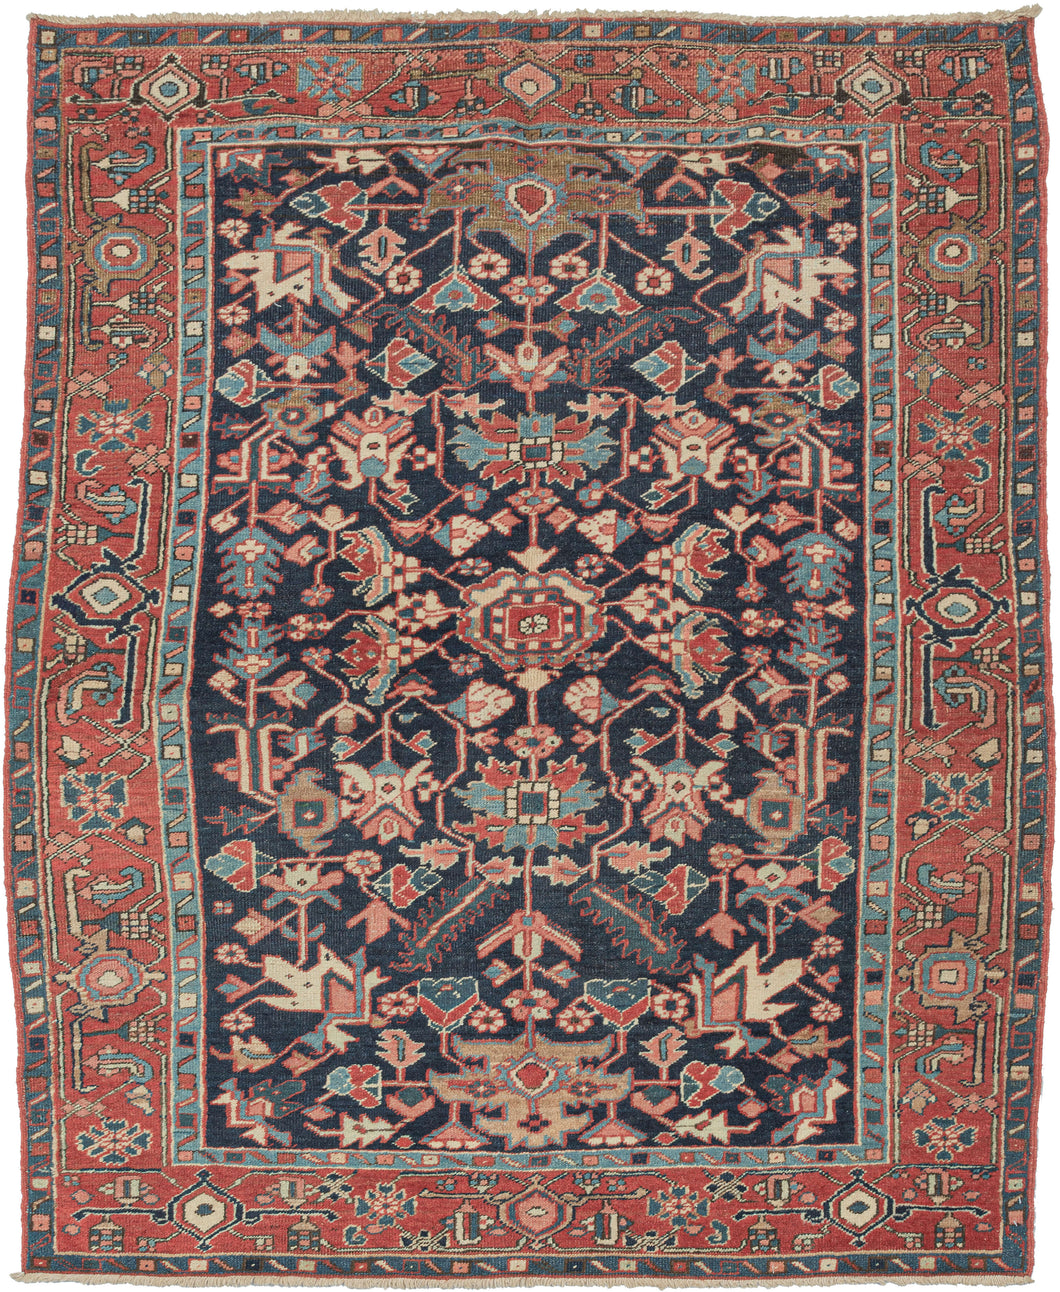 This Heriz rug was handwoven in Northwest Iran during the early 20th century.  It features a well balanced and graphic all over design in green, teal, brick, beige, gold and coral on a dark navy ground. distinctive blue to great visual effect. As most Heriz rugs come in large room sizes, this is a hard to find format. The addition of the less common all over pattern and rare blue ground 